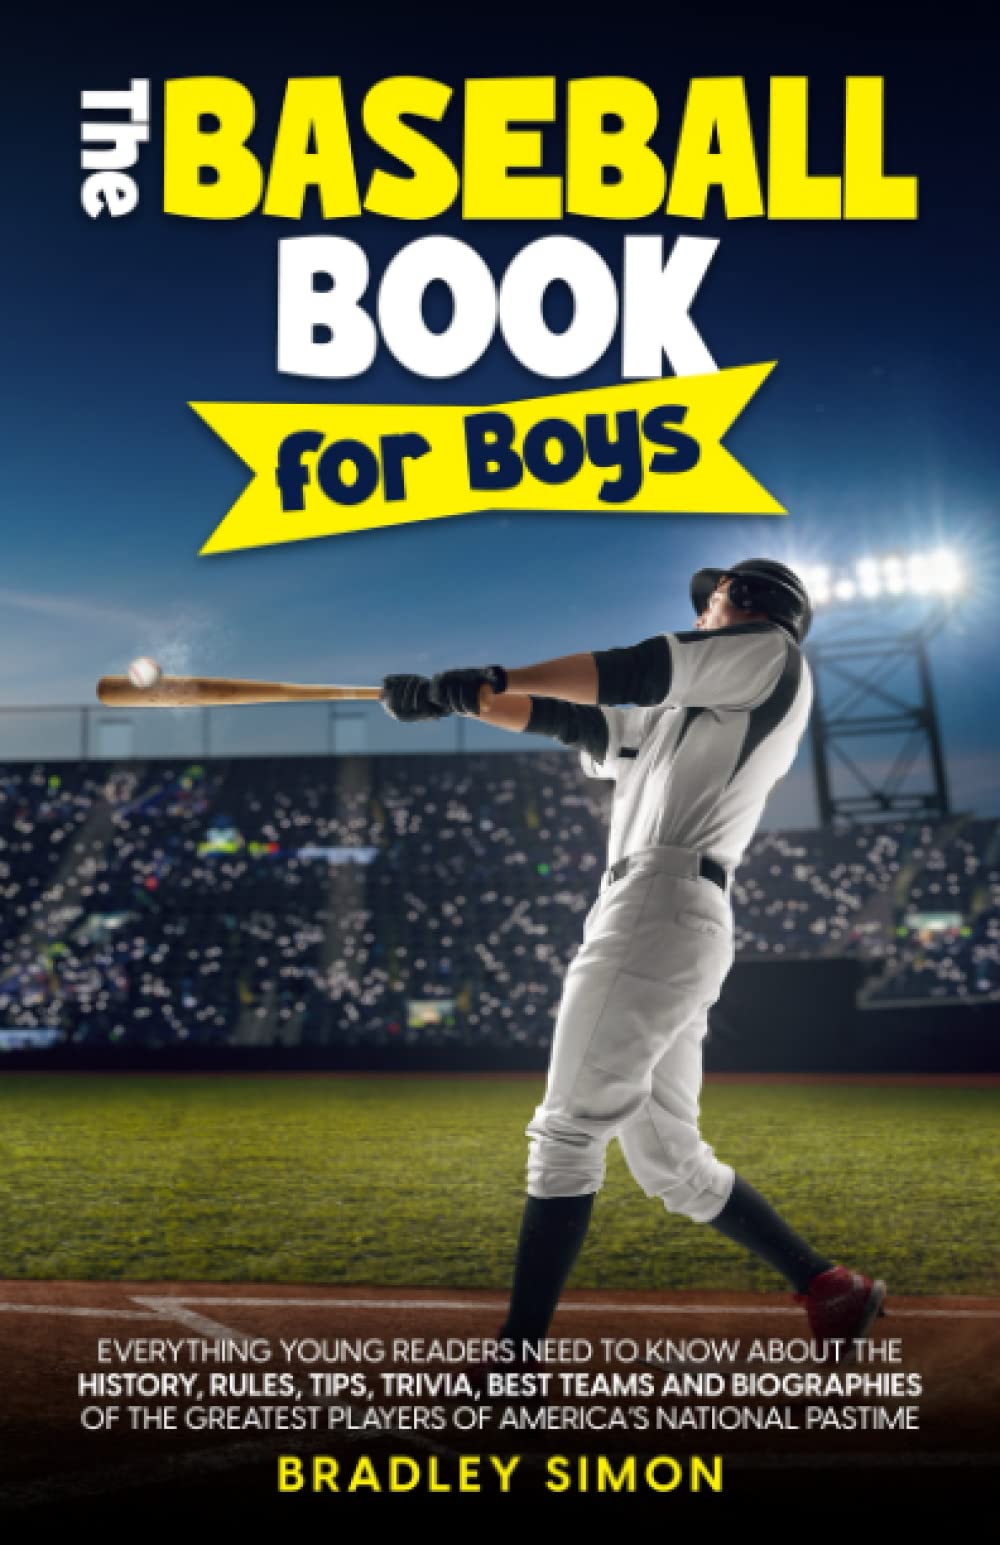 The Baseball Book for Boys: Everything Young Readers Need to Know About the History, Rules, Tips, Trivia, Best Teams and Biographies of the Greatest Players of America's National Pastime